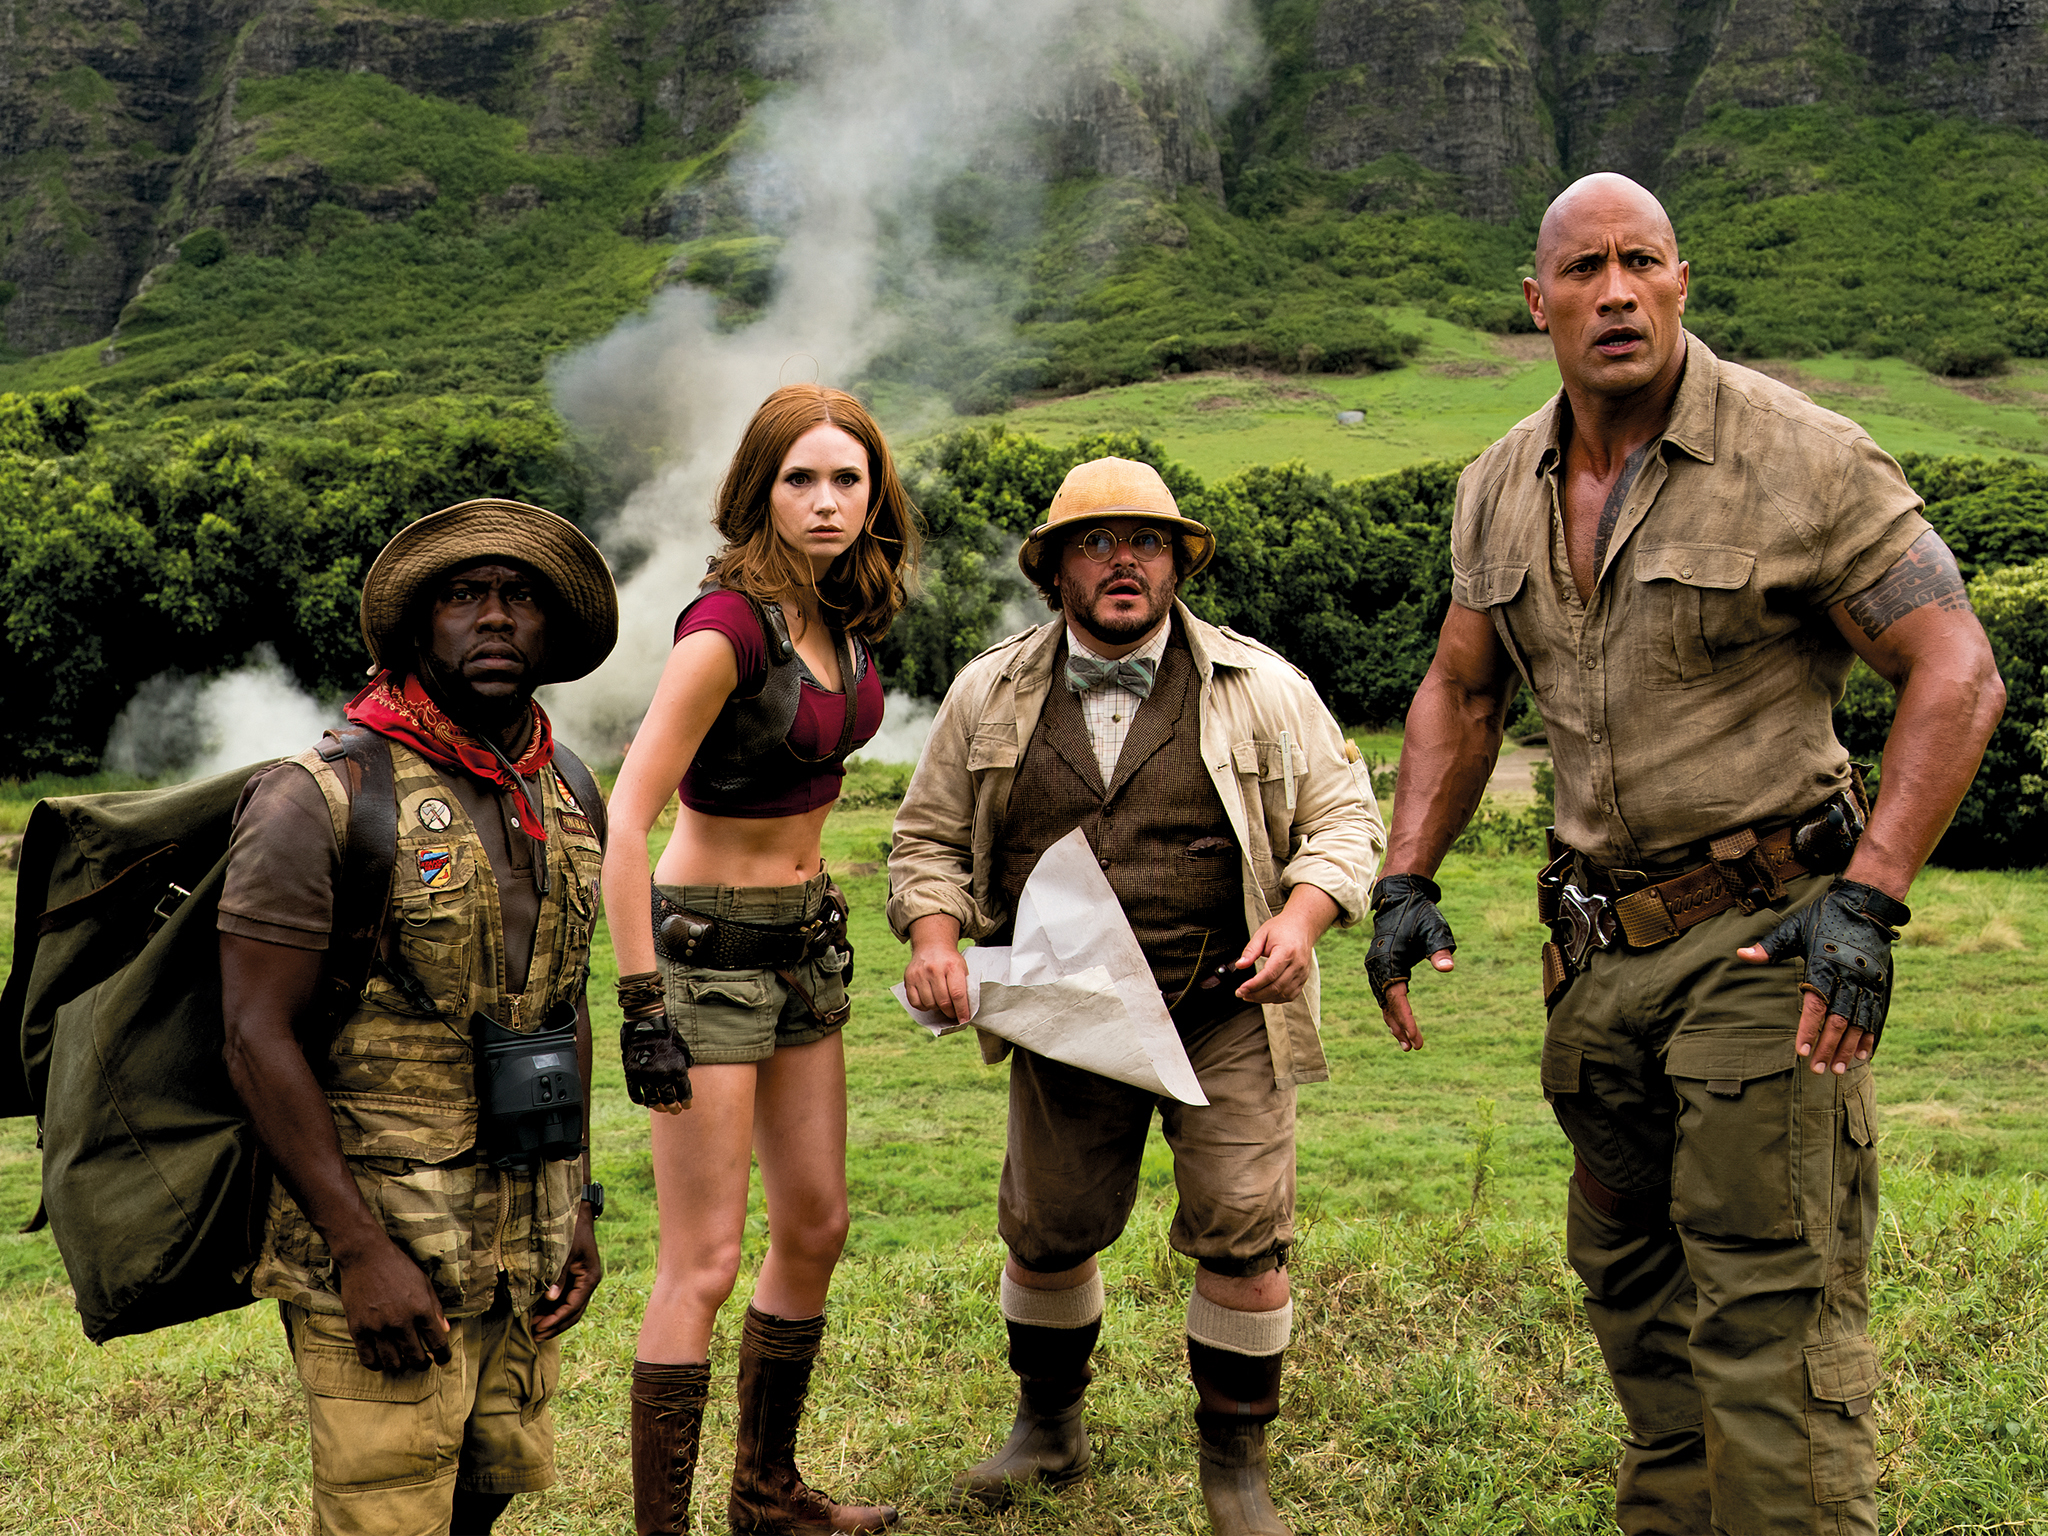 Jumanji: Welcome to the Jungle download the new version